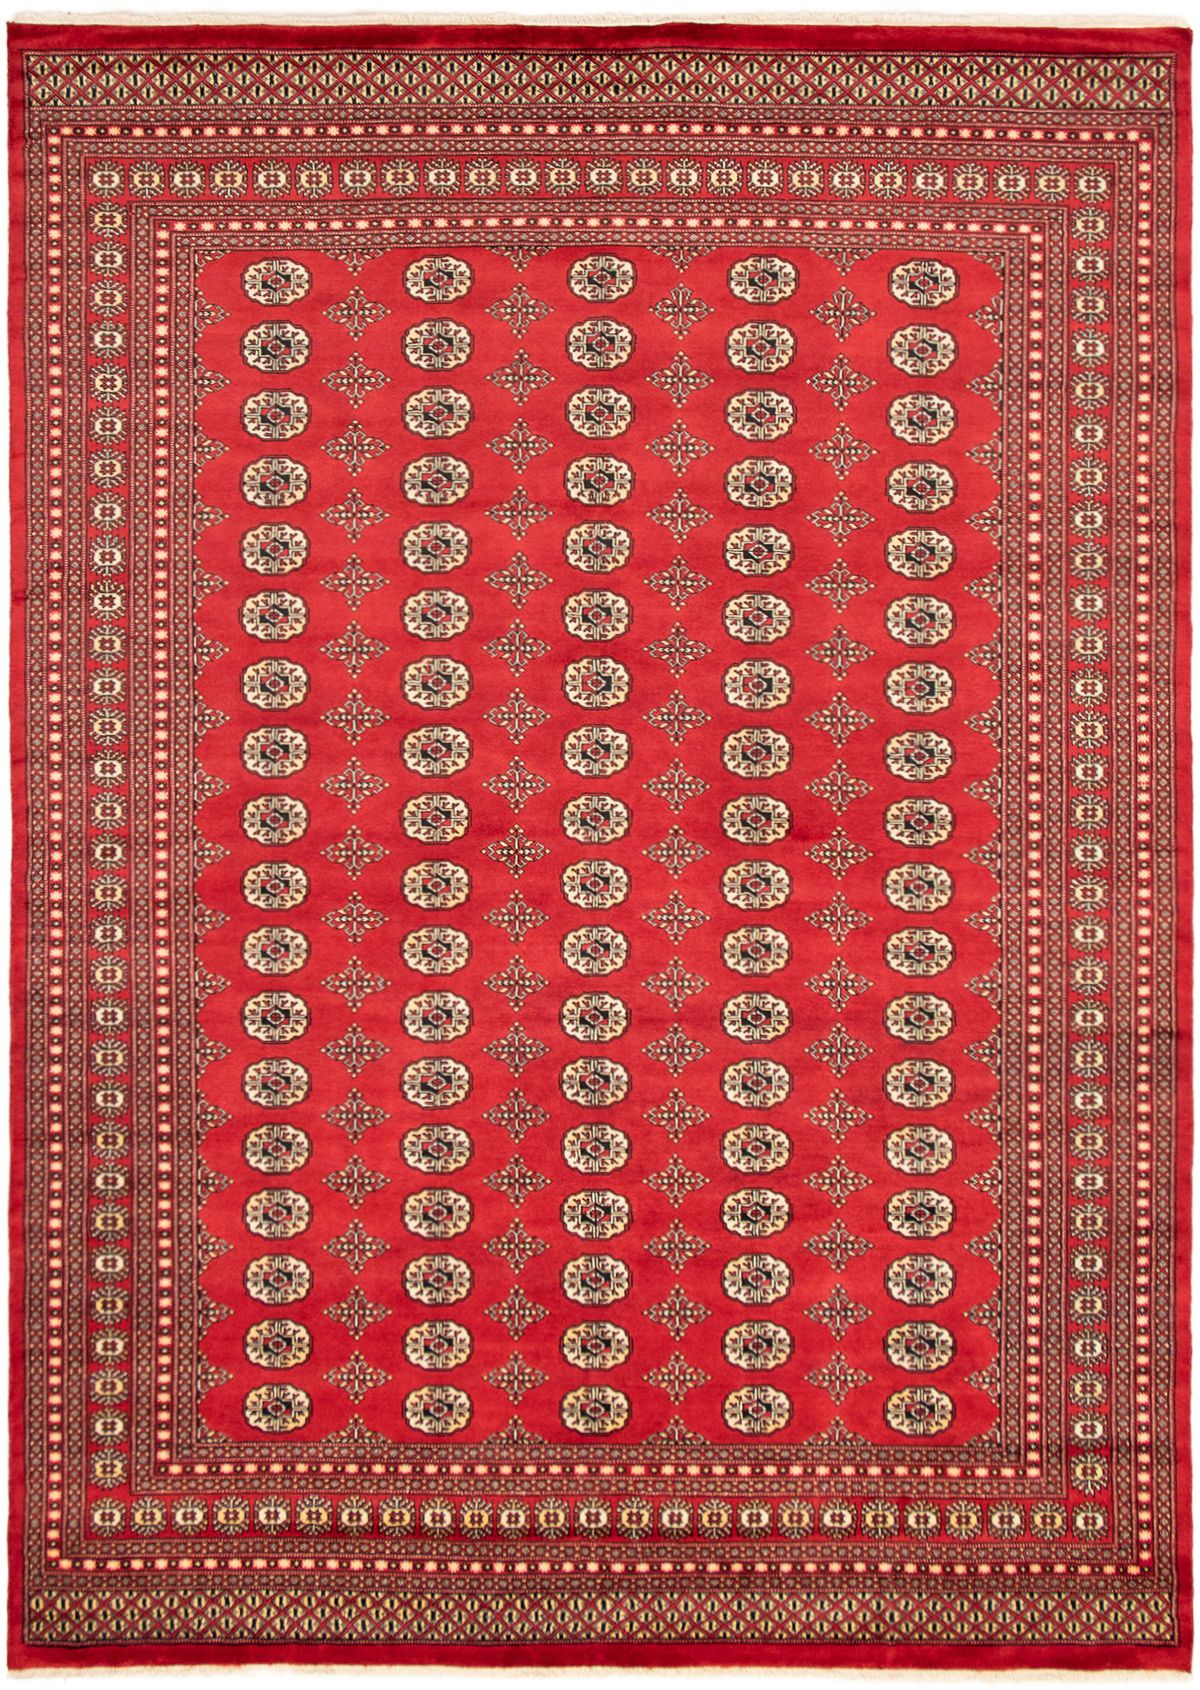 Hand-knotted Finest Peshawar Bokhara Red Wool Rug 9'2" x 12'2" Size: 9'2" x 12'2"  